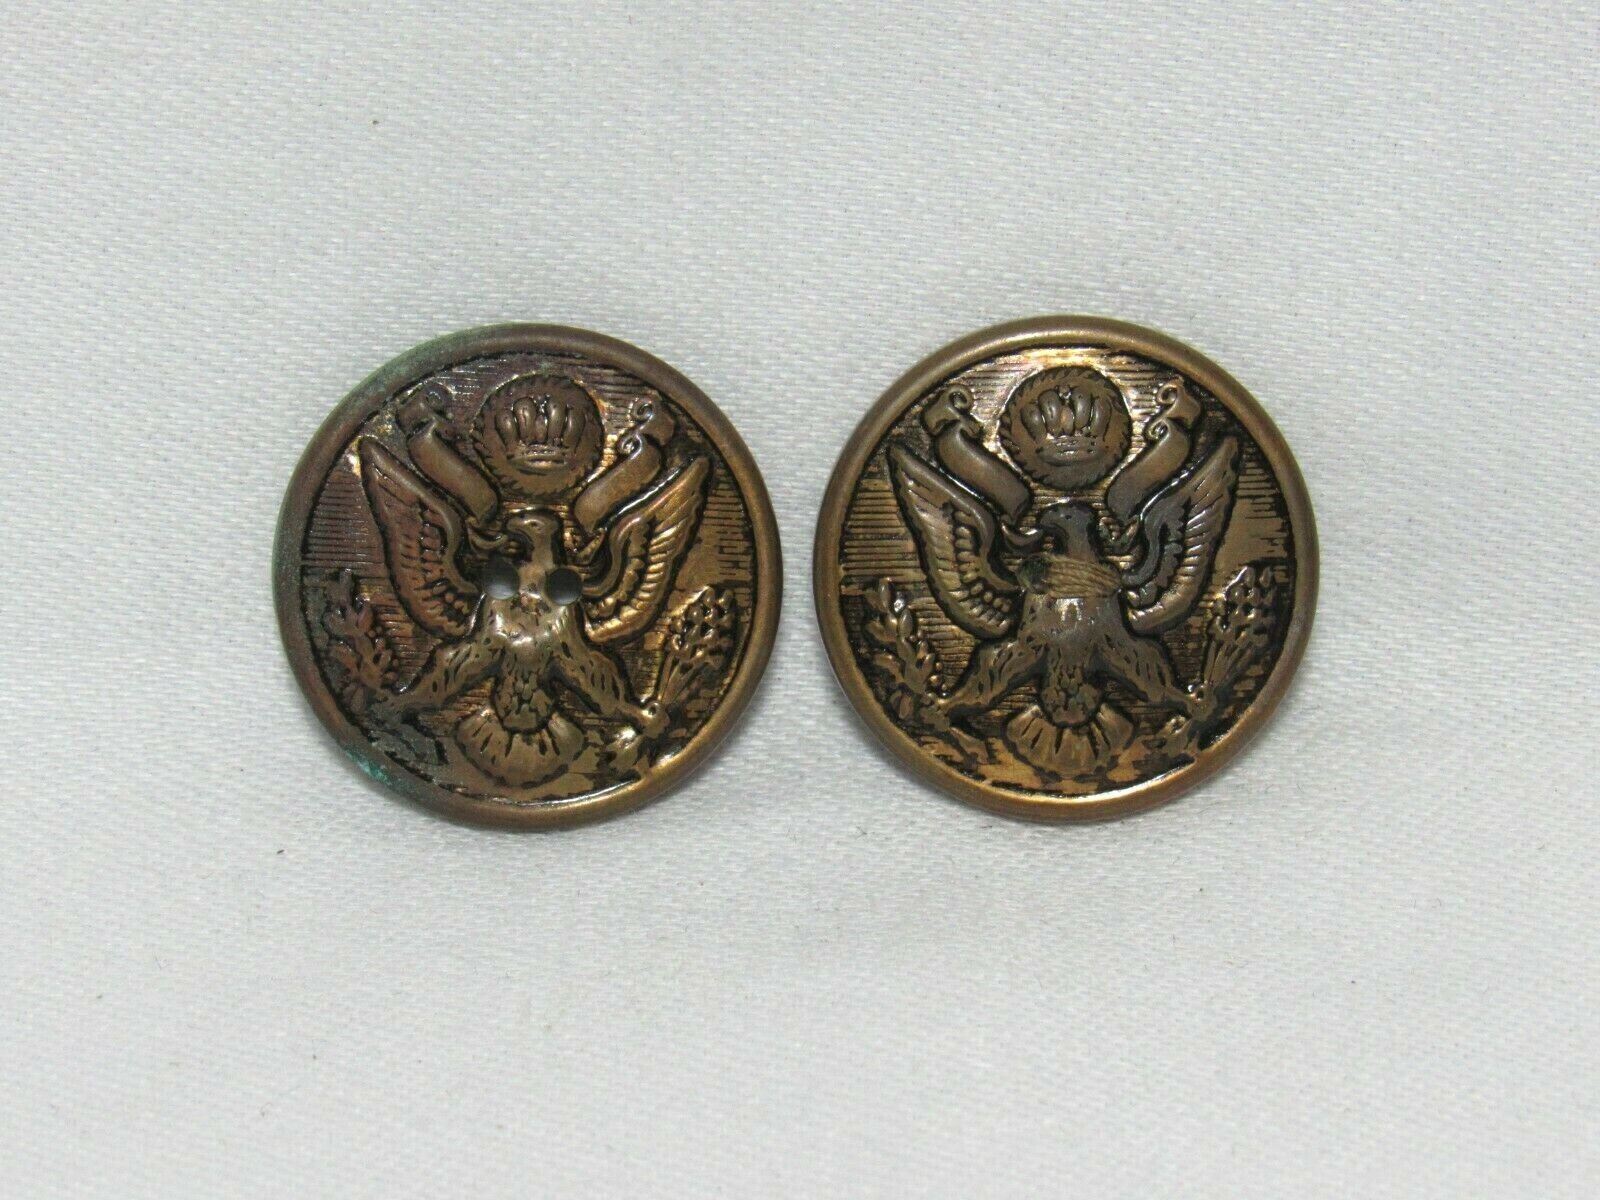 Vintage Brass US Army Great Seal Eagle Uniform Buttons Lot of 2